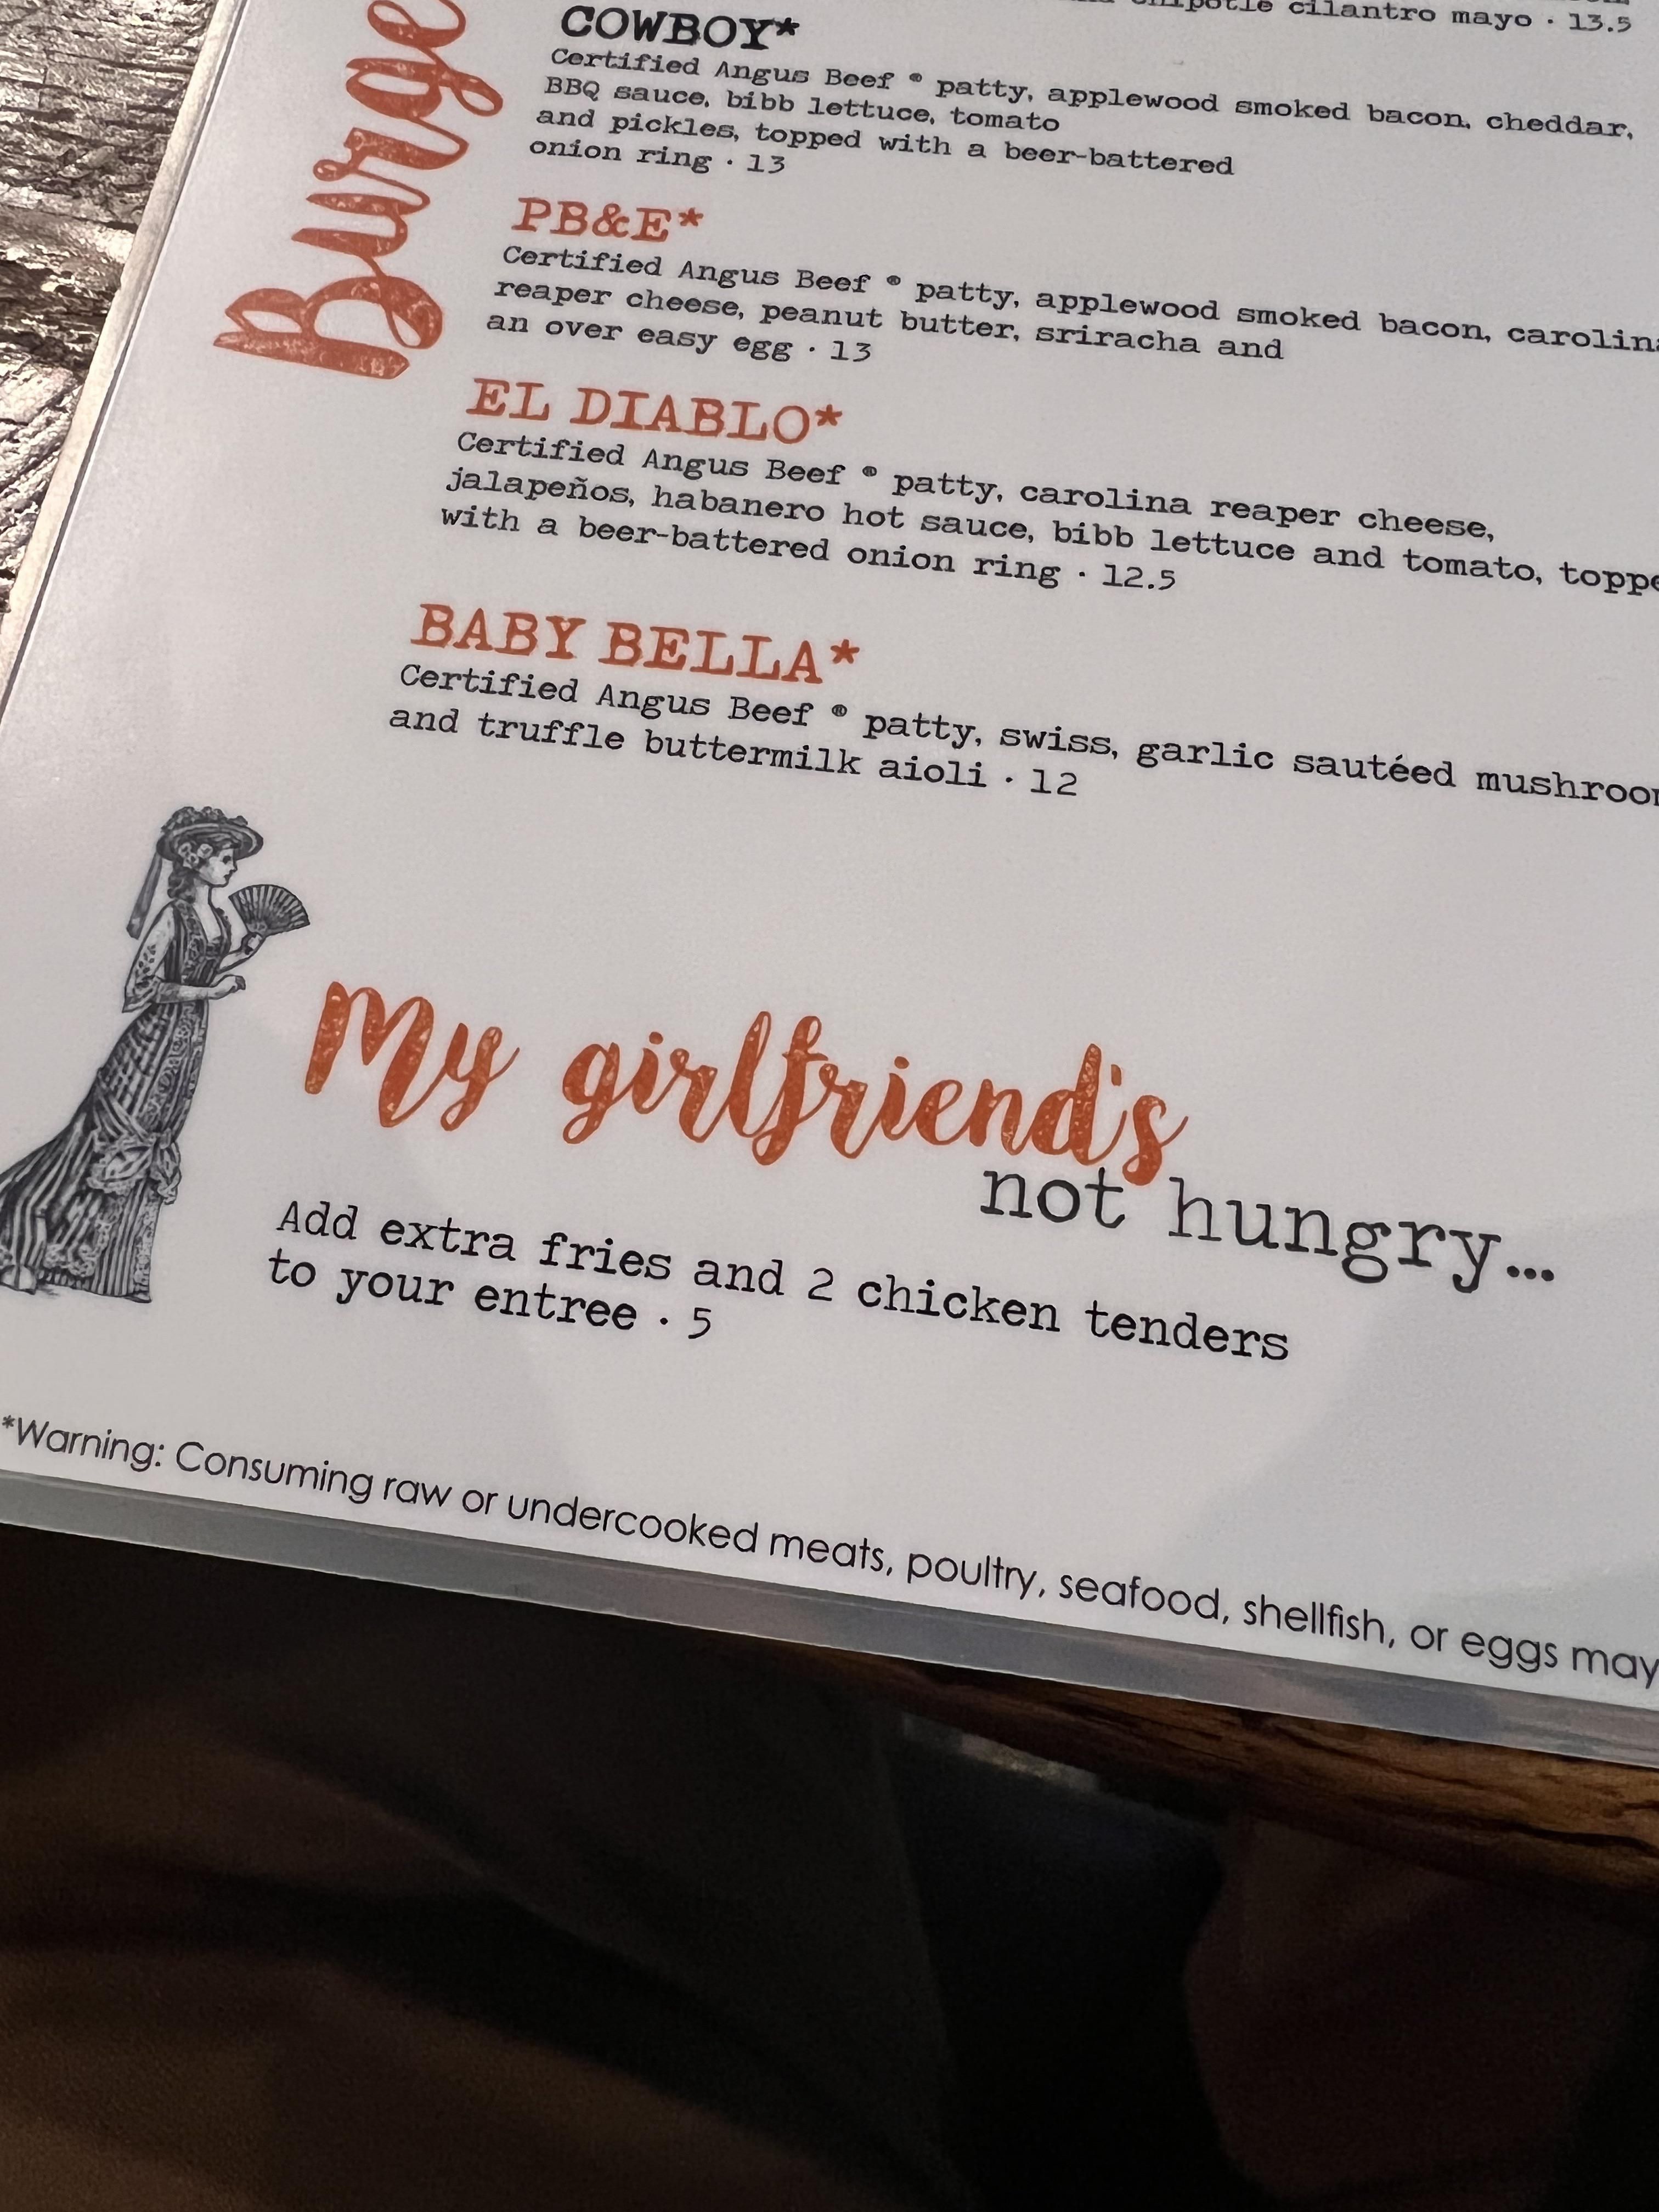 This menu has a “girlfriend’s not hungry” option to add to your meal